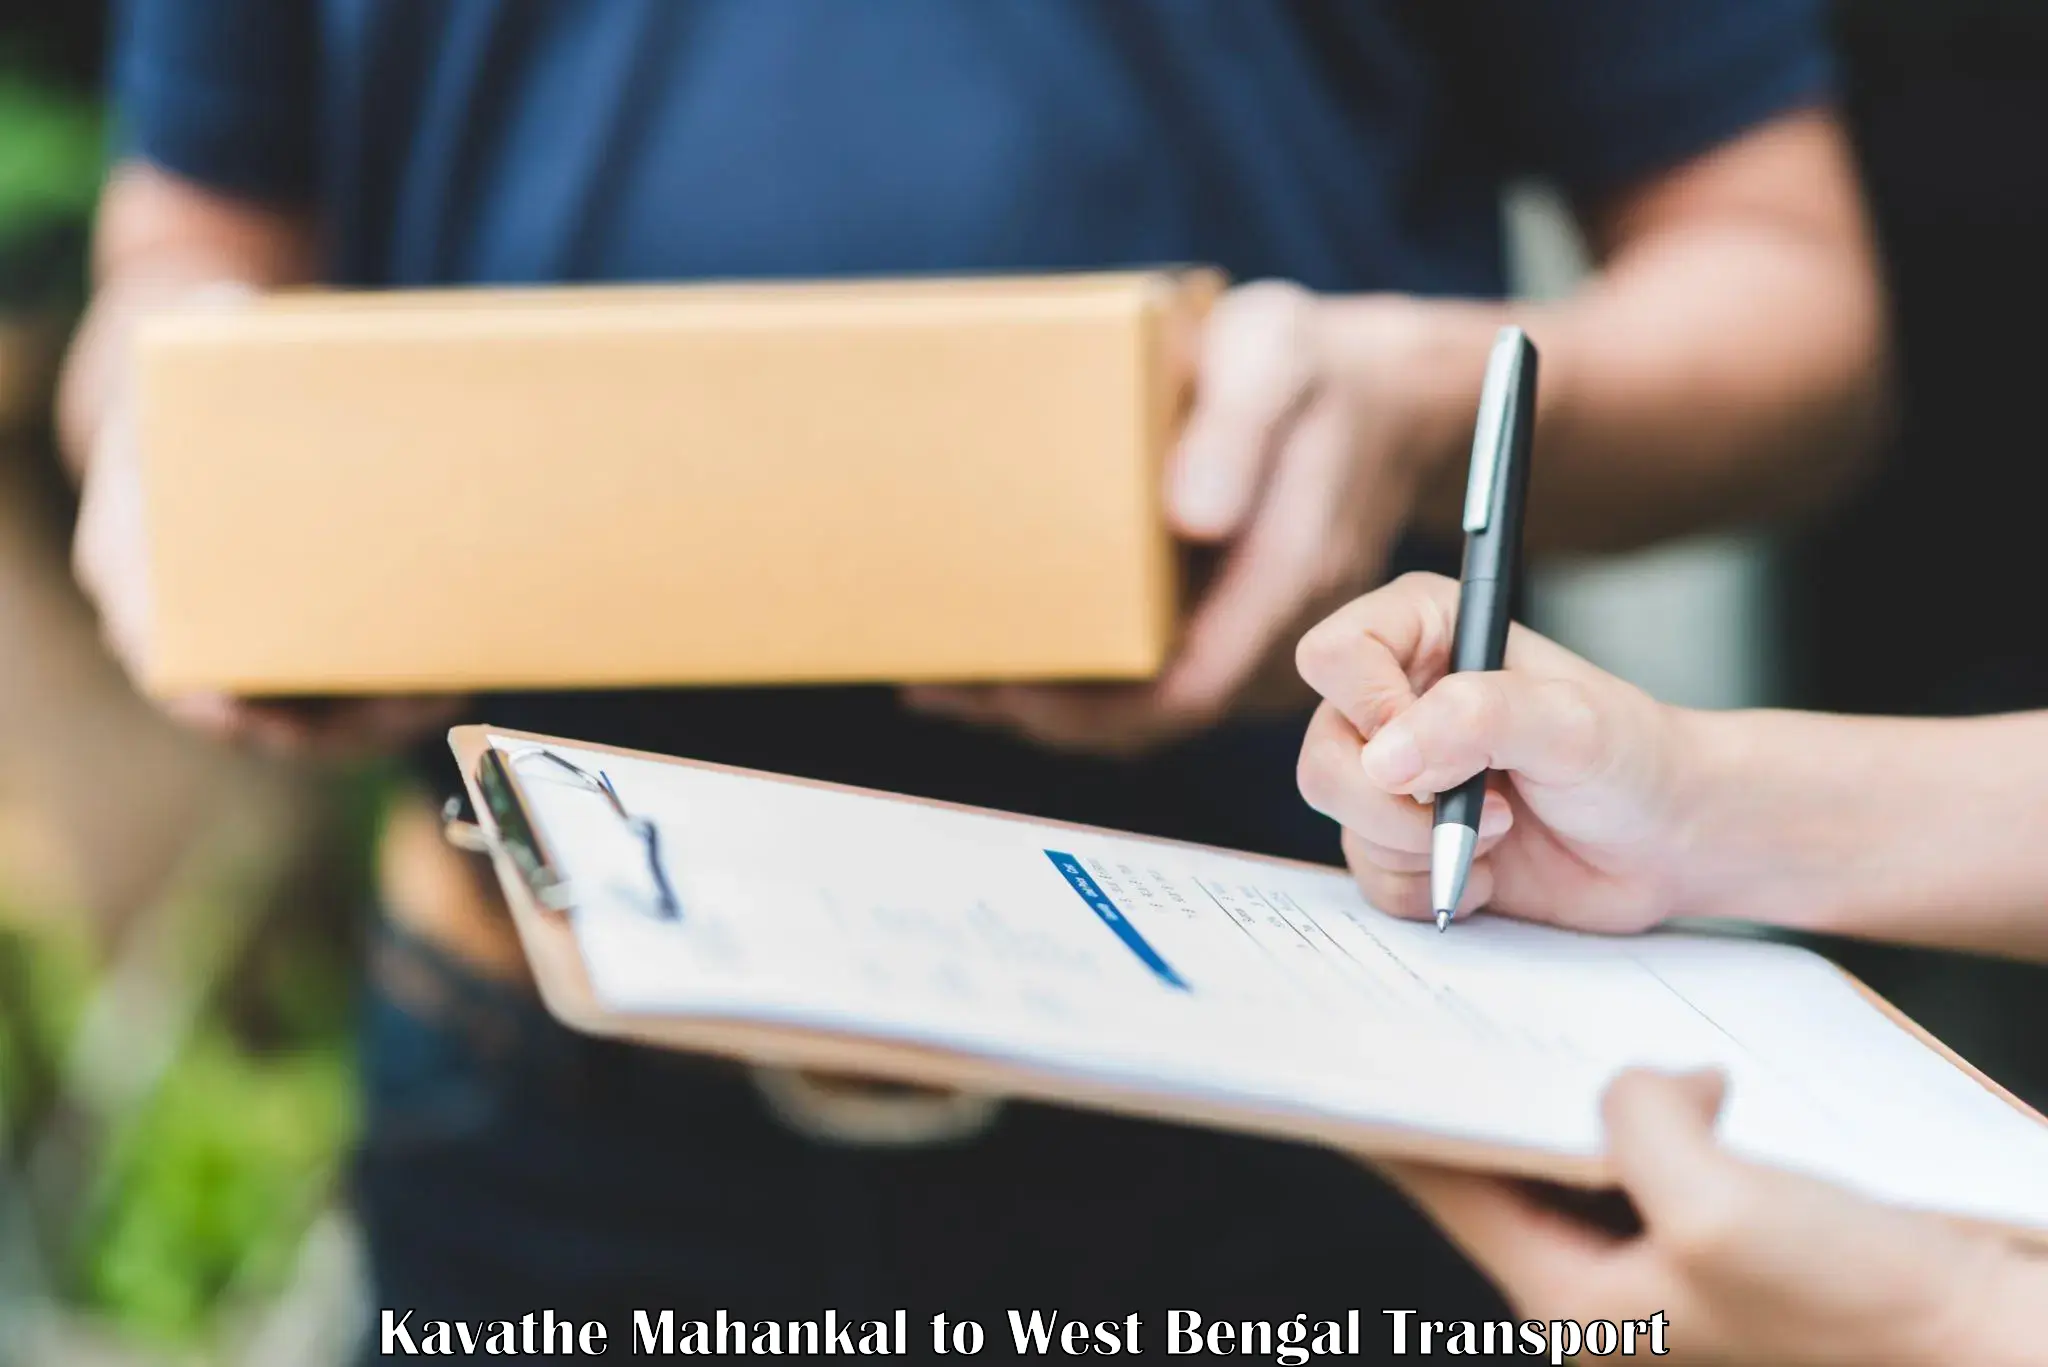 Delivery service Kavathe Mahankal to West Bengal